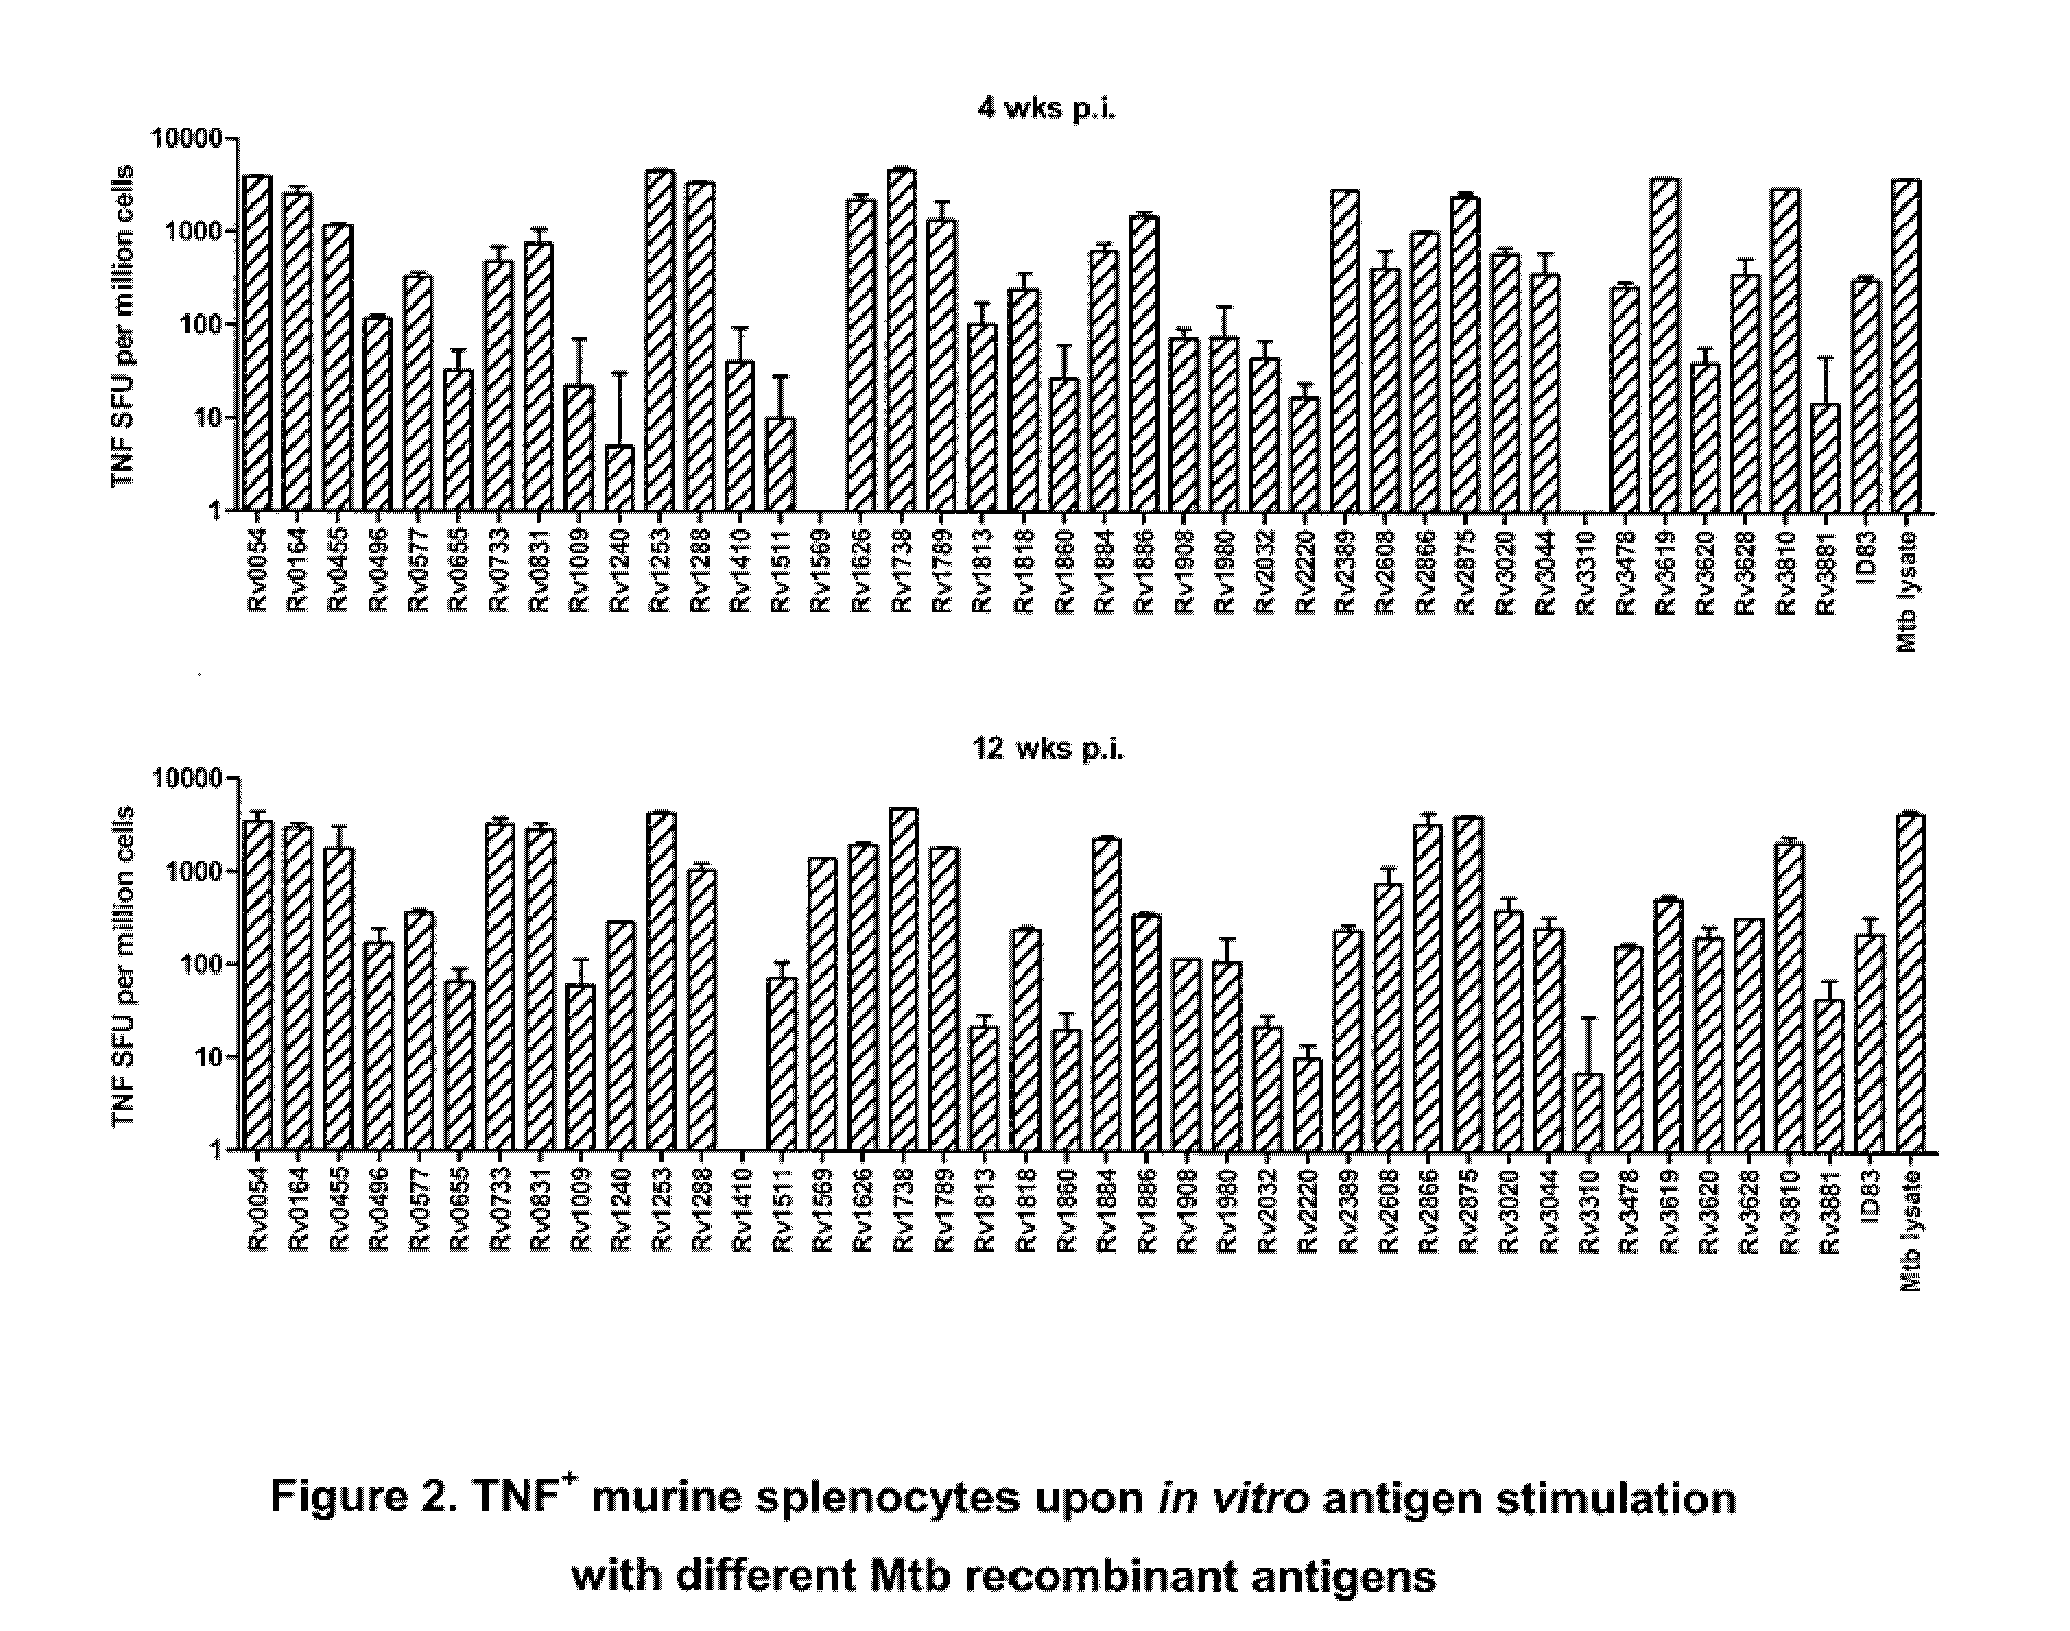 Immunogenic compositions comprising mycobacterium tuberculosis polypeptides and fusions thereof